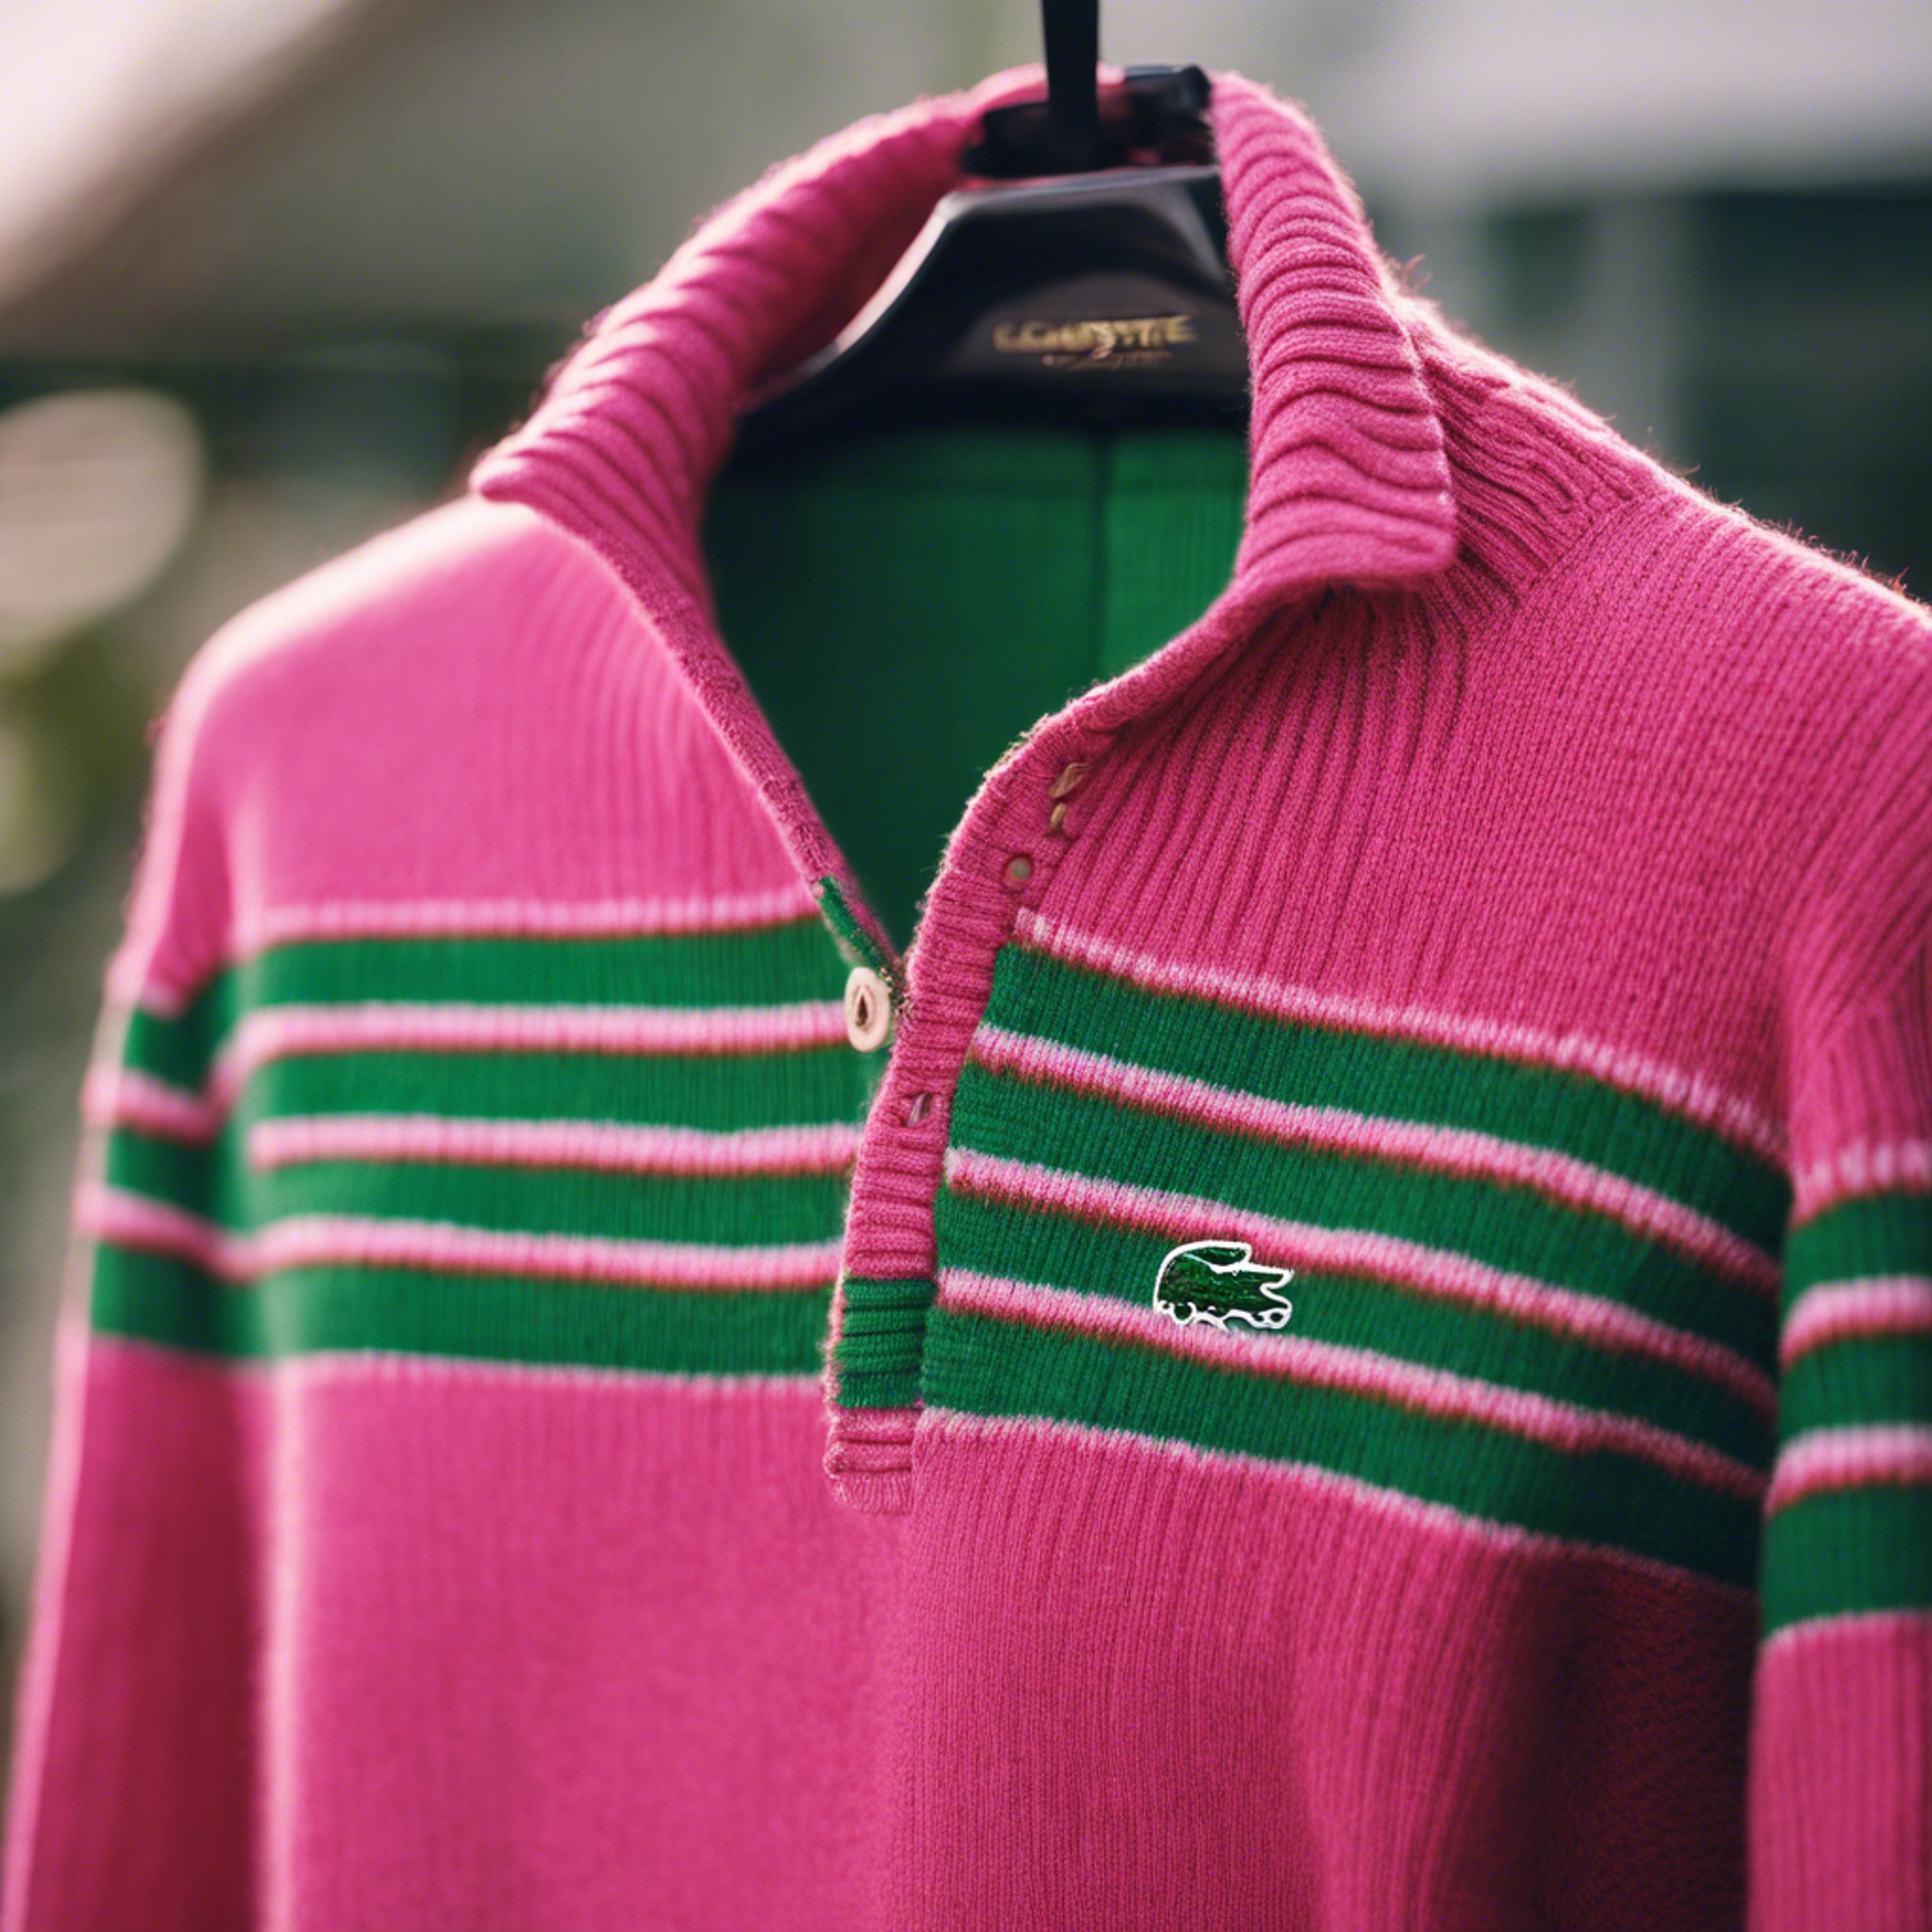 A preppy Lacoste sweater in bright pink and green stripes. 벽지[46dc671cf42d4e658ddb]